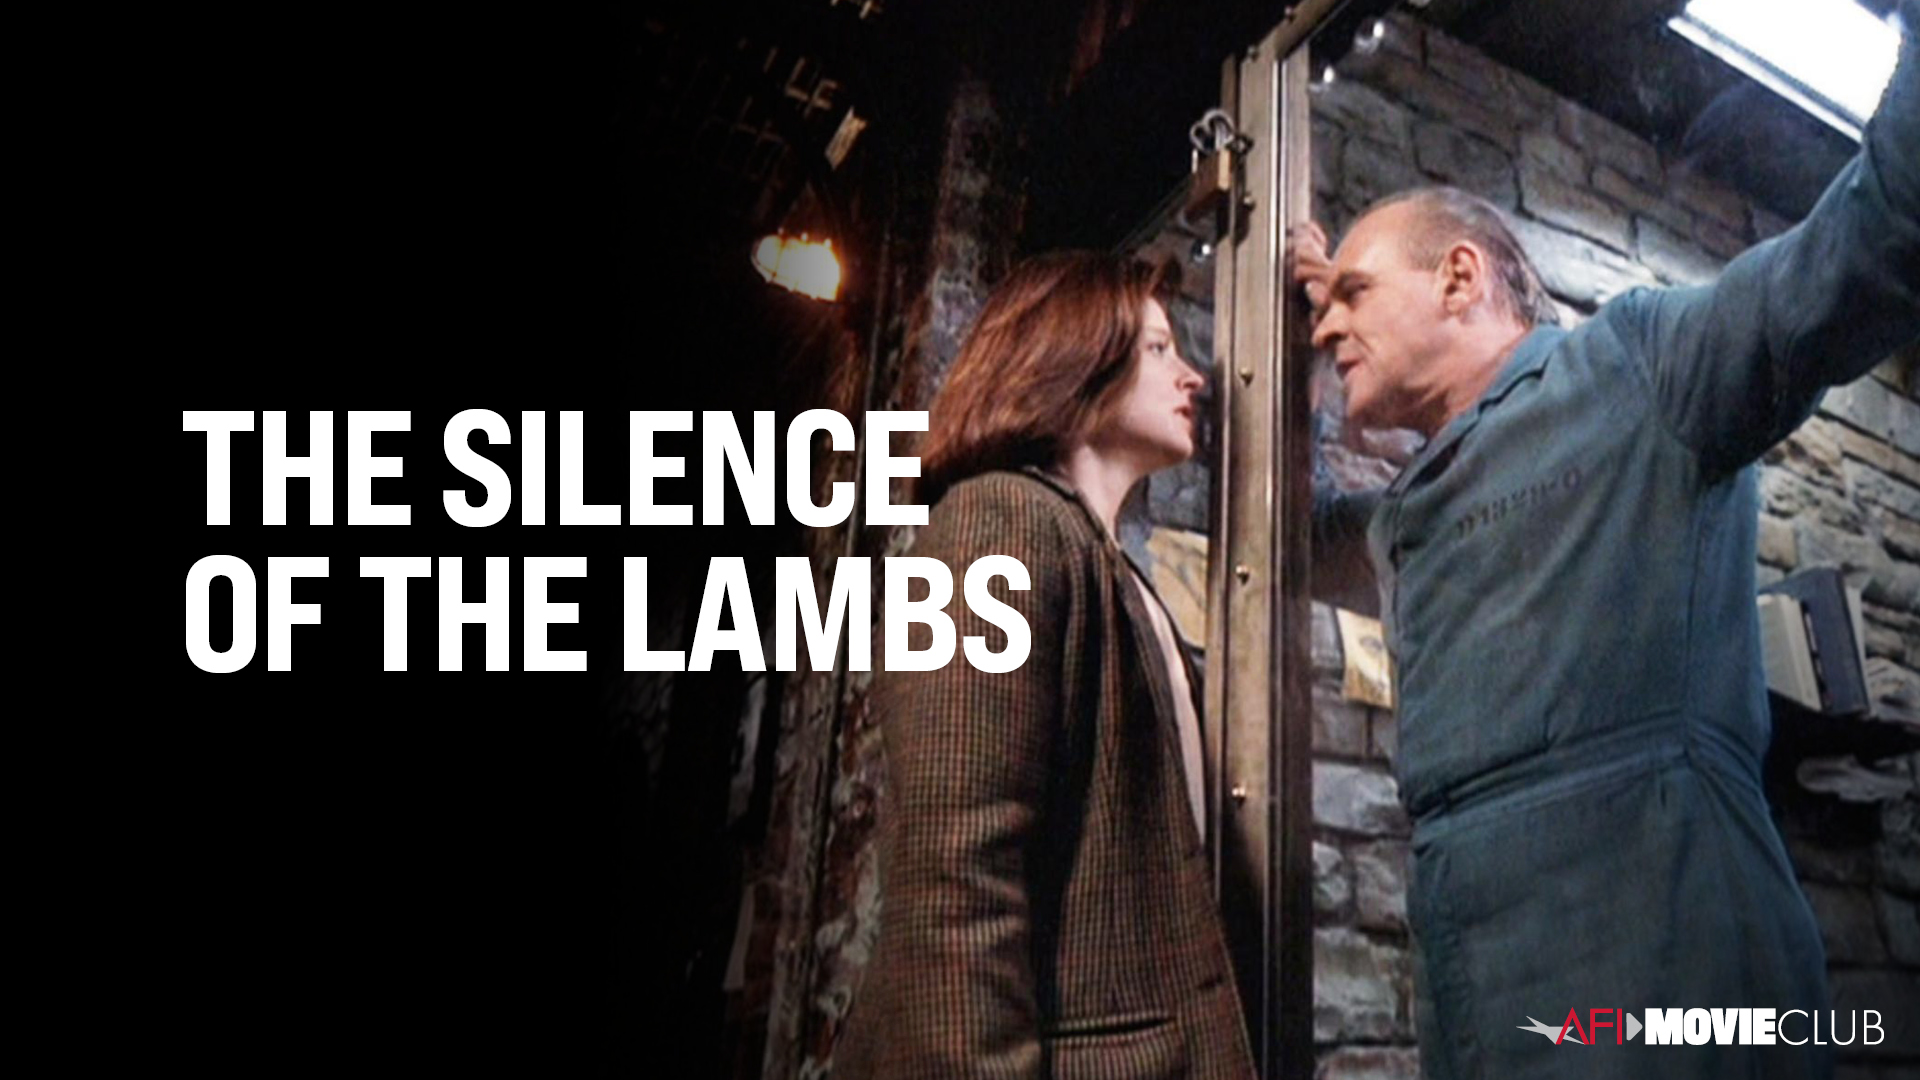 The Silence of the Lambs Film Still - Jodie Foster and Anthony Hopkins